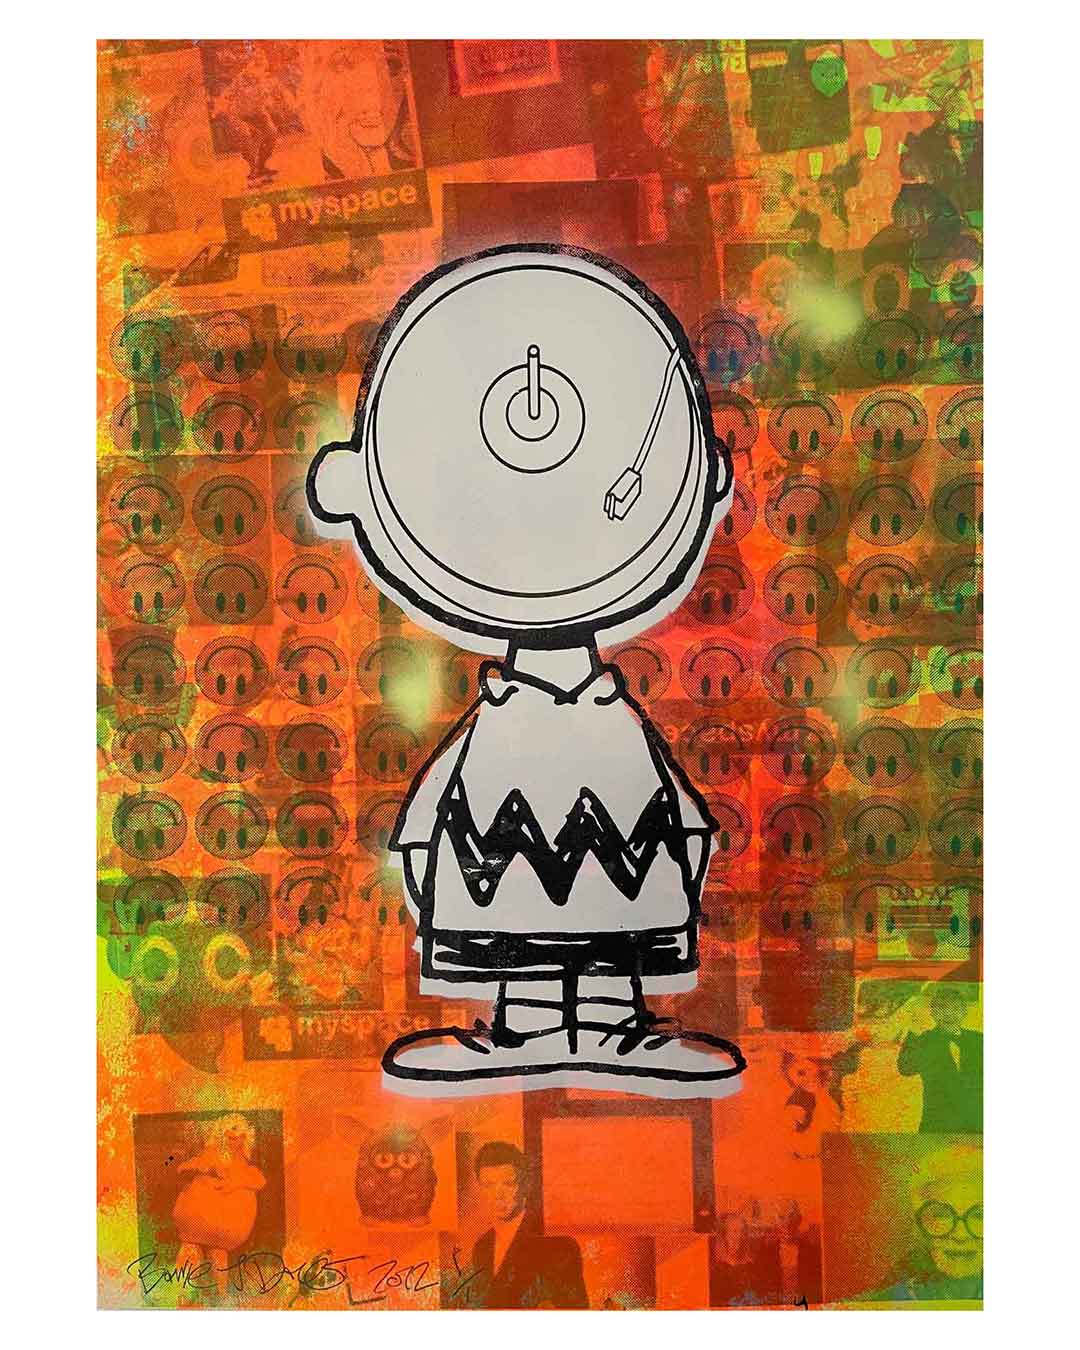 Charlie Says Print by Barrie J Davies 2022, unframed Silkscreen print on paper (hand finished) edition of 1/1, A2 size 42cm x 59.4cm.